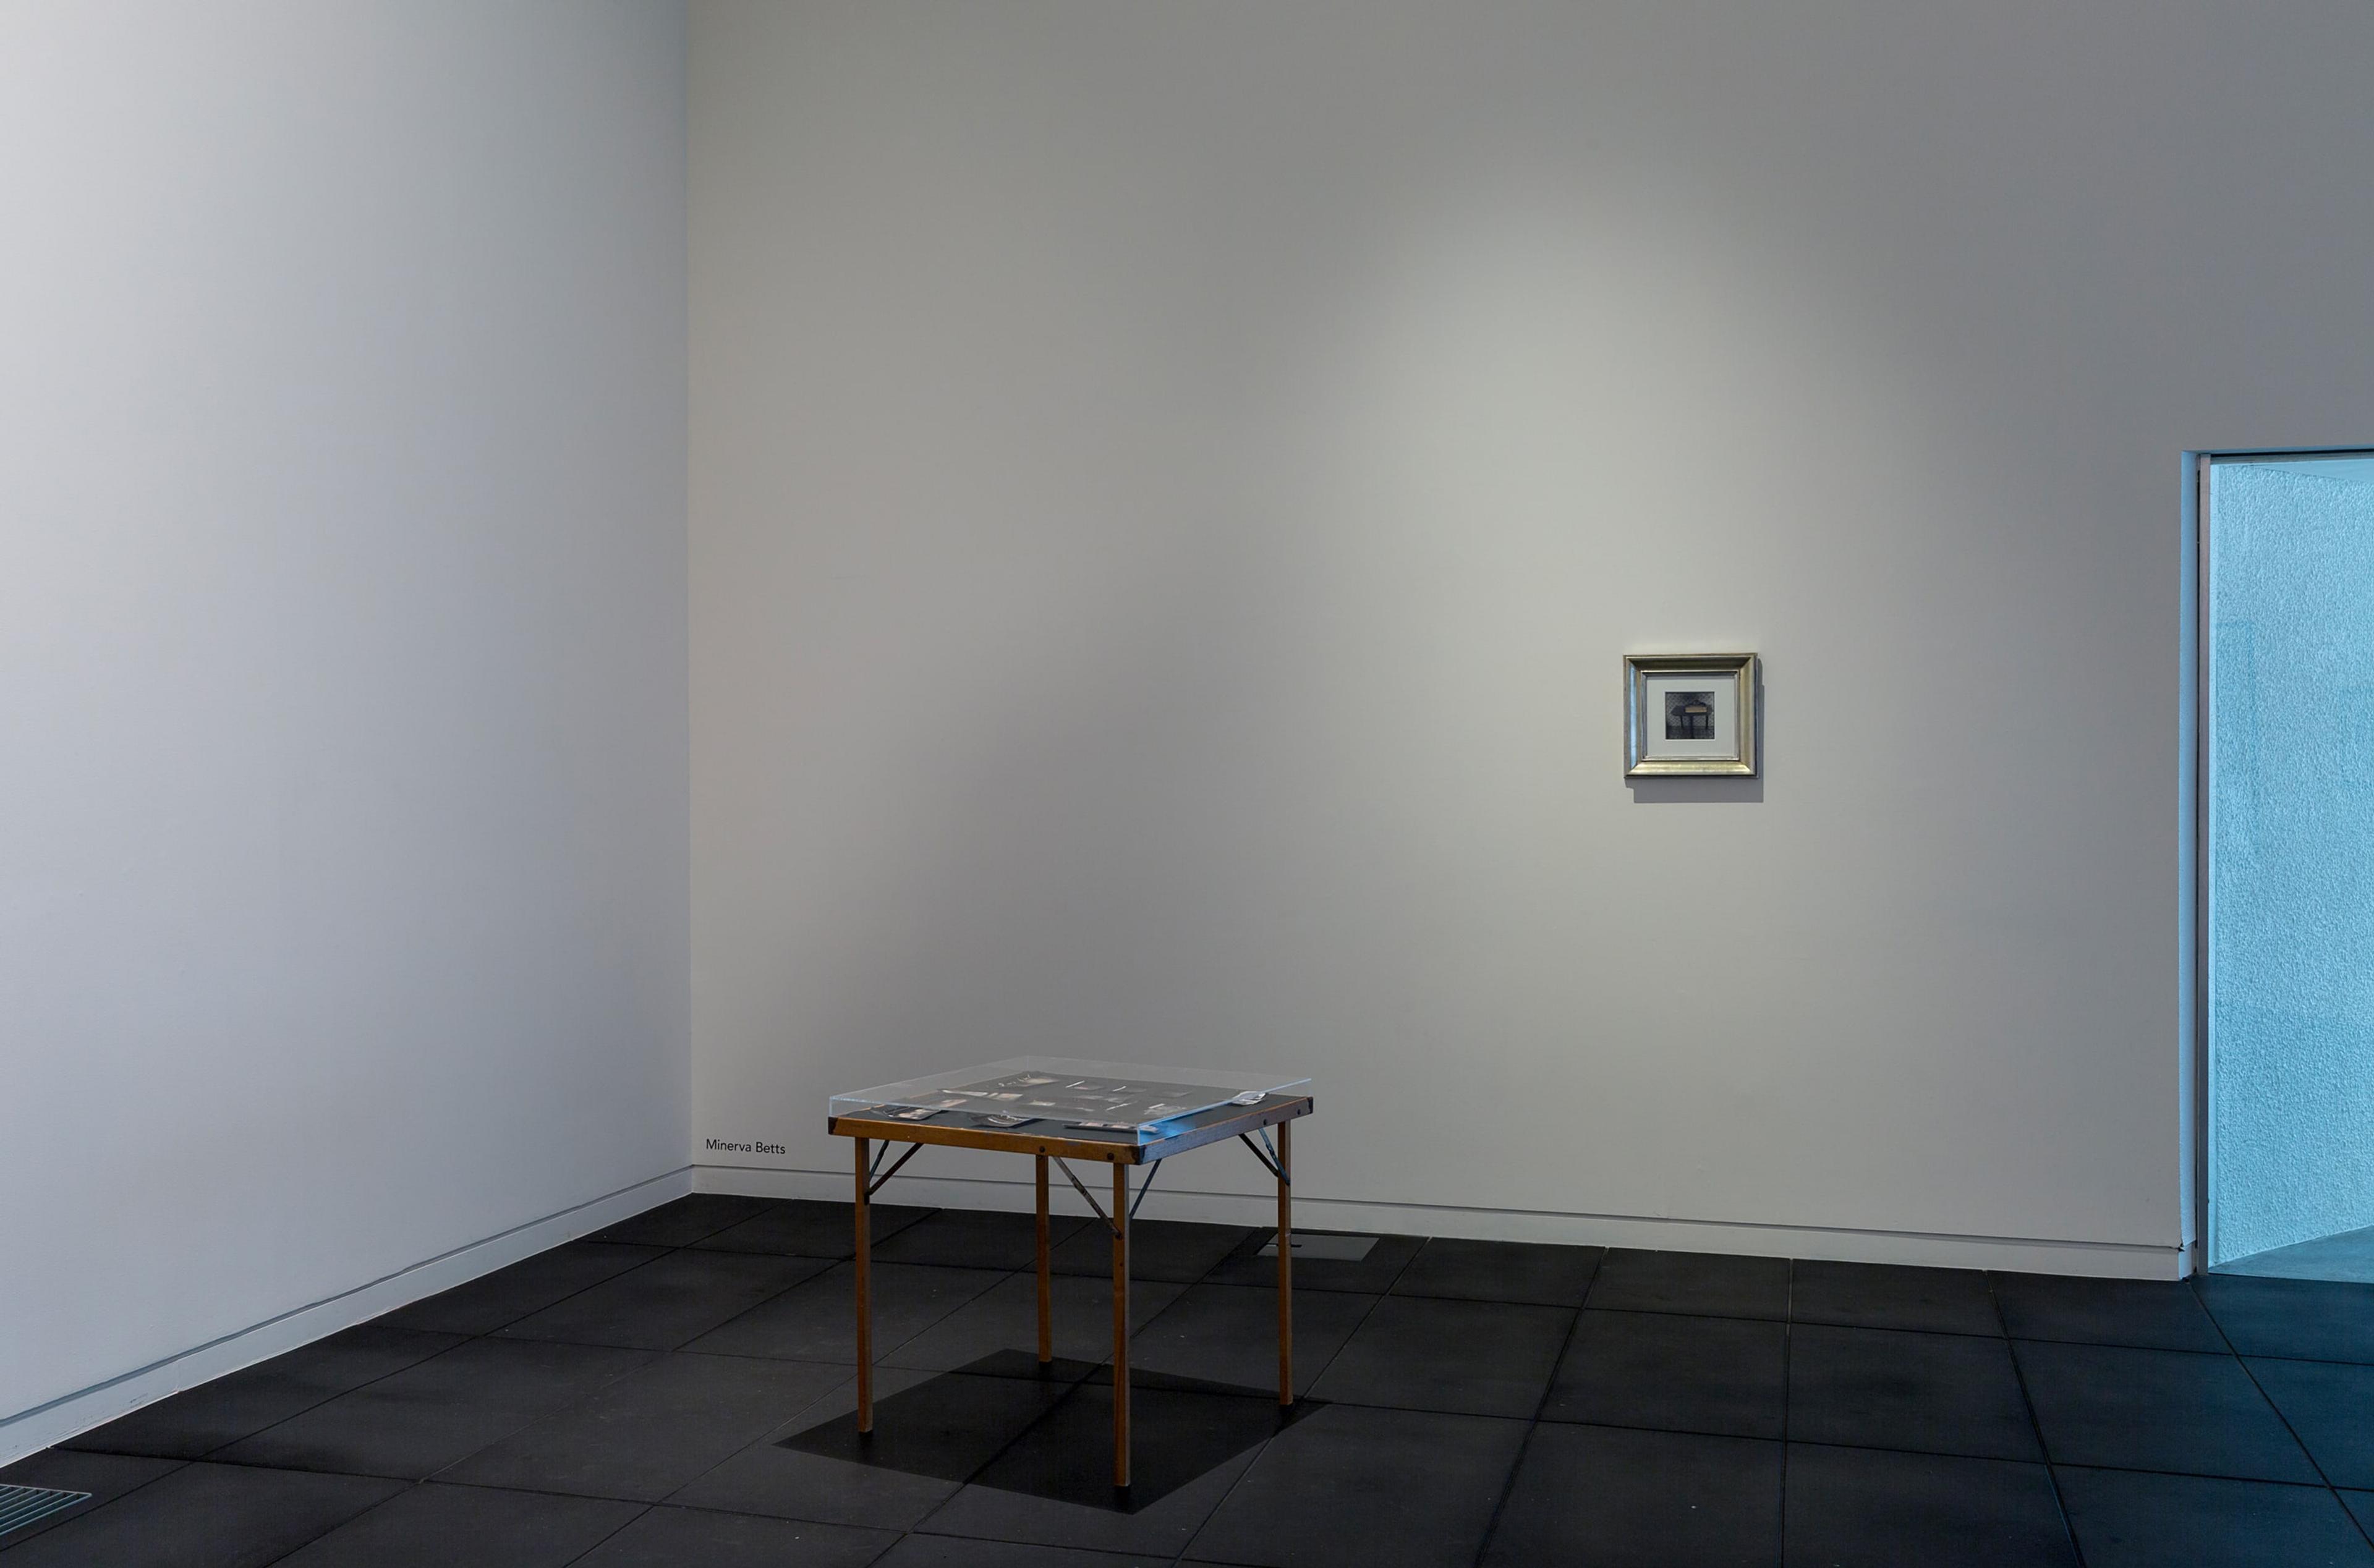 Installation view: Minerva Betts, courtesy of the Estate of L. Budd and Michael Lett, Auckland. In Fragments of a World, curated by Sandy Callister, Adam Art Gallery Te Pātaka Toi, Victoria University of Wellington (photo: Shaun Waugh)